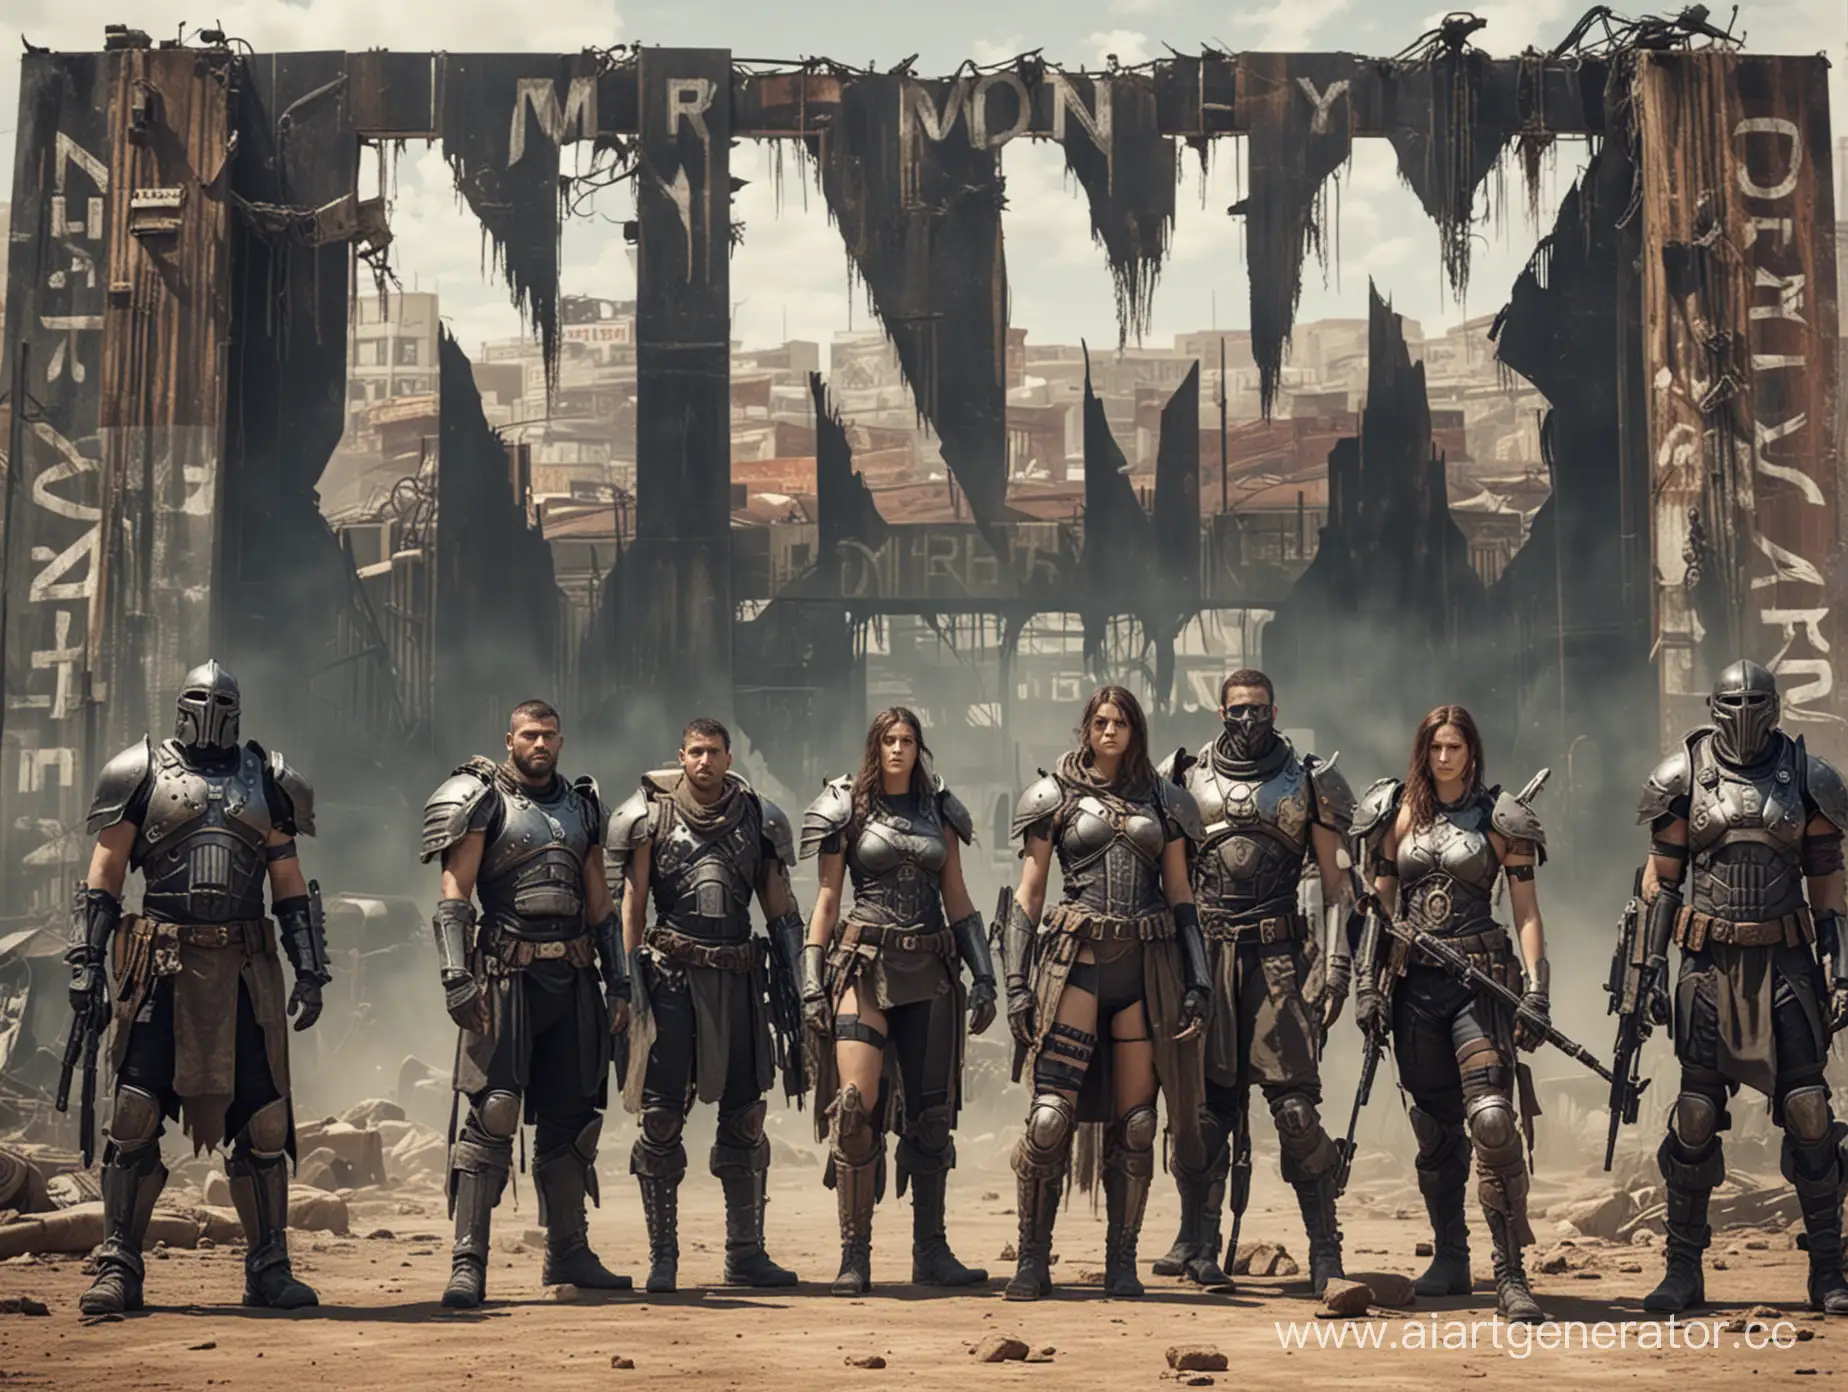 PostApocalyptic-Group-Stands-Firm-Against-N-O-M-E-R-C-Y-Sign